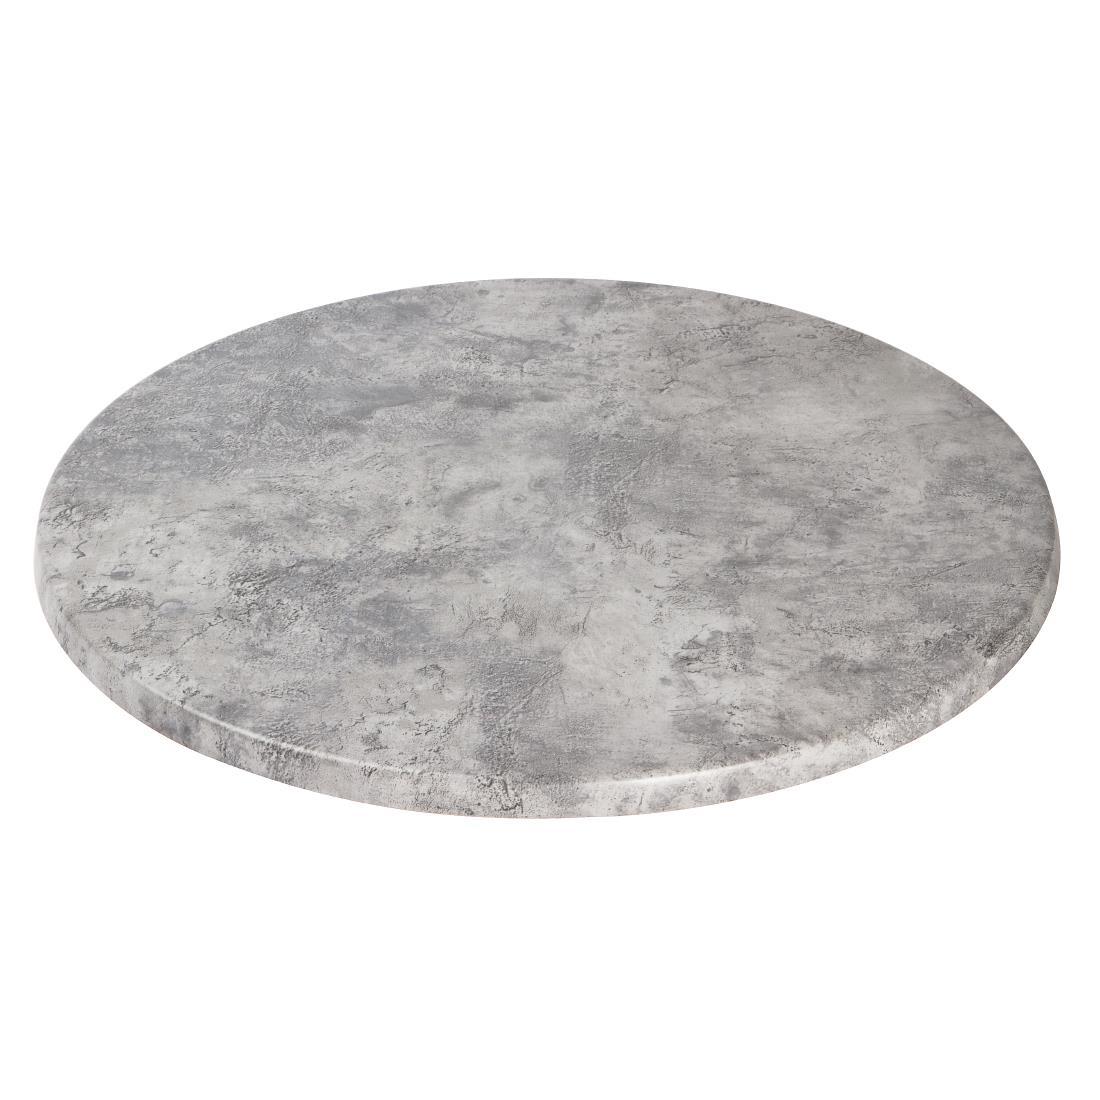 Werzalit Pre-Drilled Round Table Top Concrete 600mm - GM420  - 3